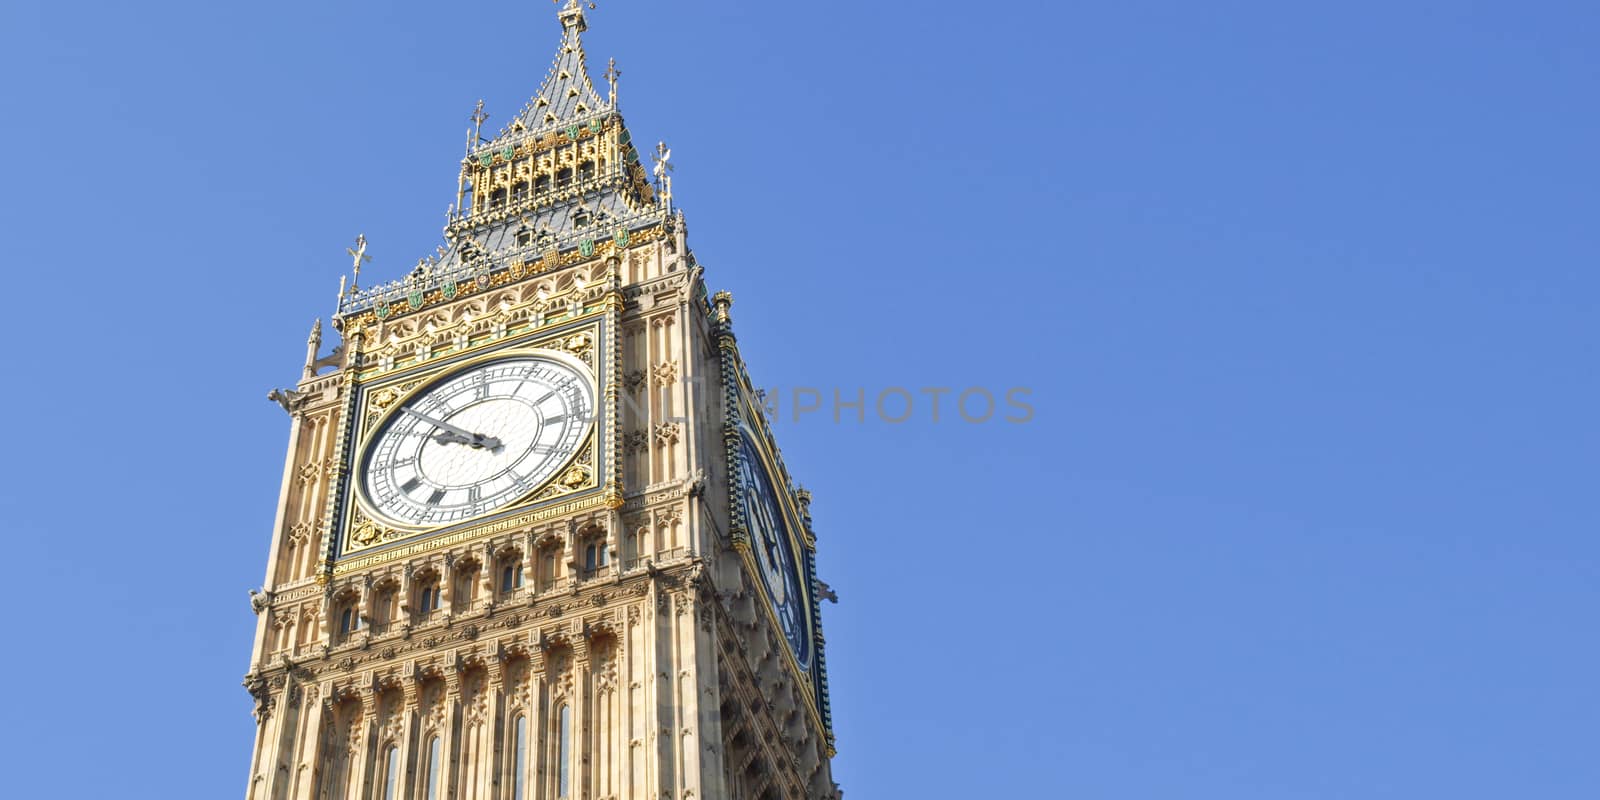 Big Ben at the Houses of Parliament, Westminster Palace, London, UK - with copyspace